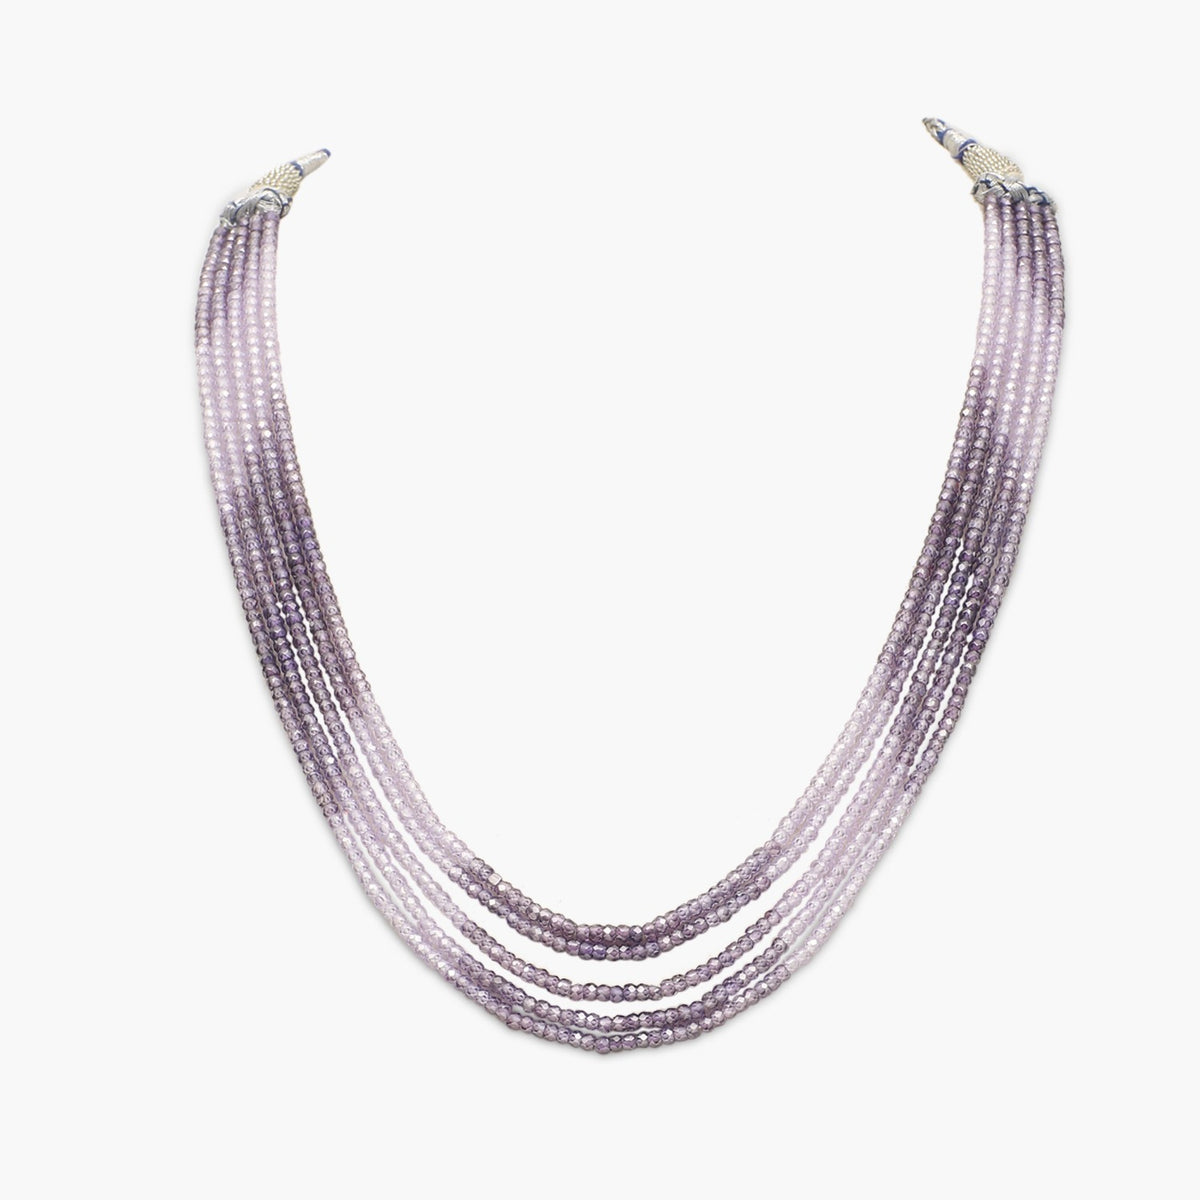 Lavender shaded Faceted Cubic Zirconia Beads Necklace